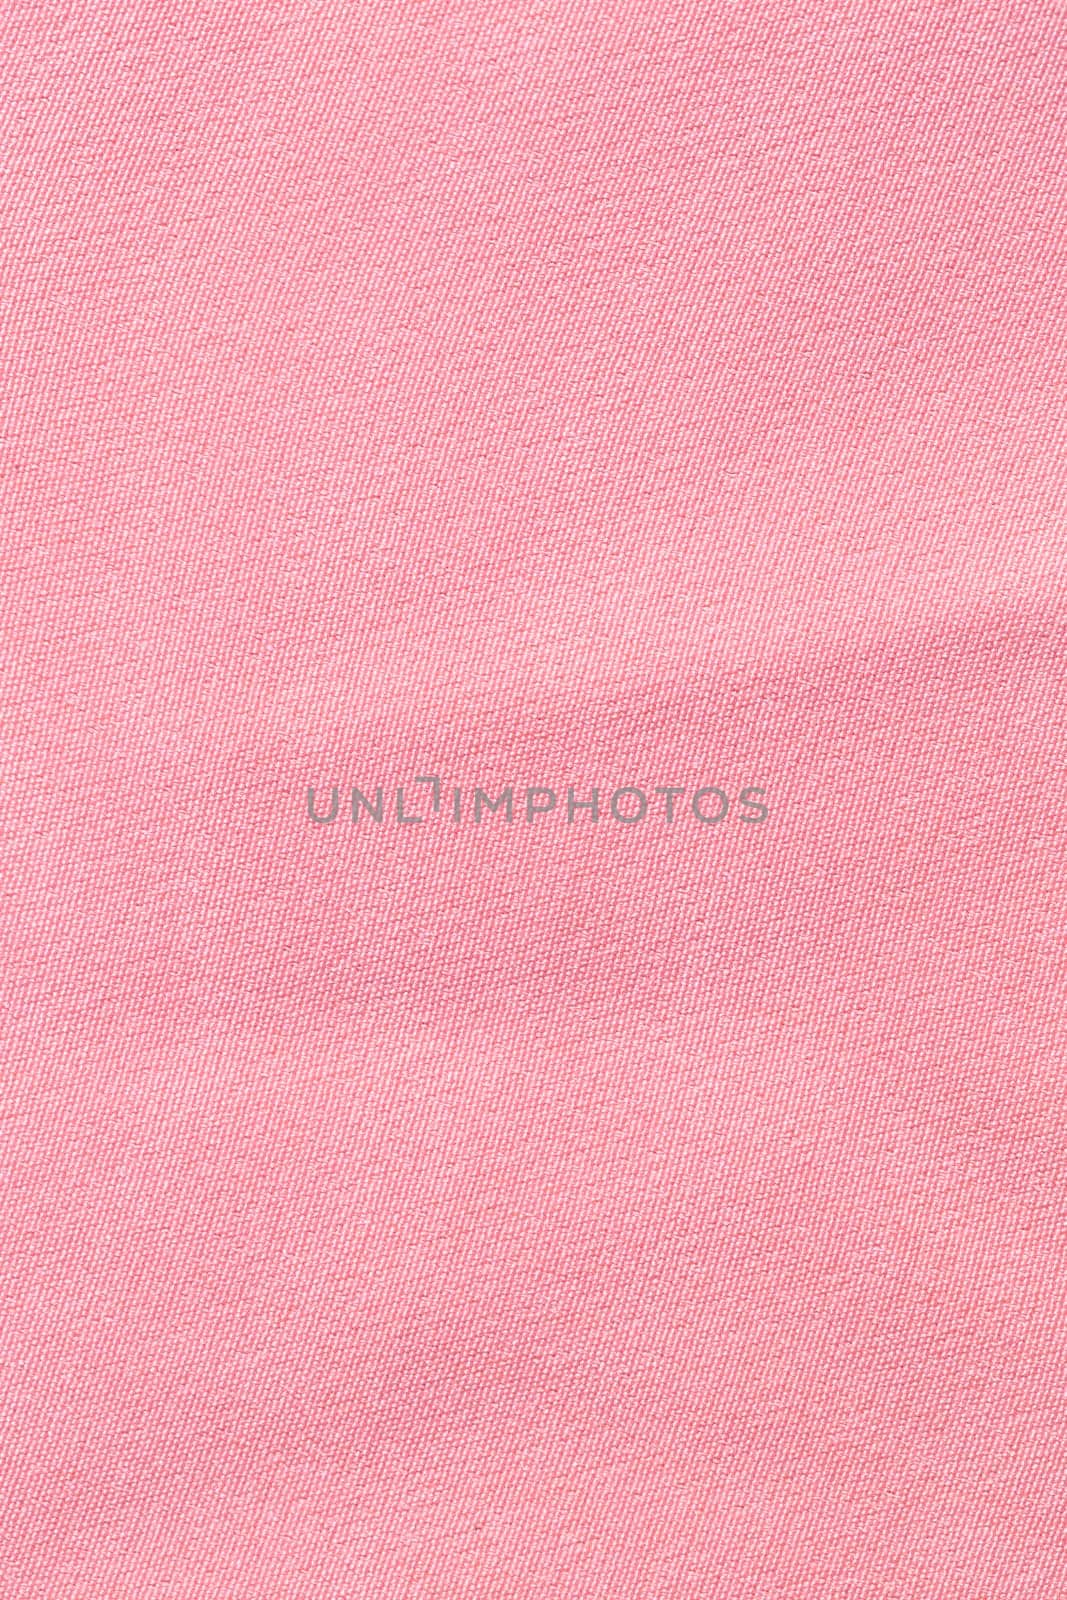 Pink linen pastel fabric, background or texture.